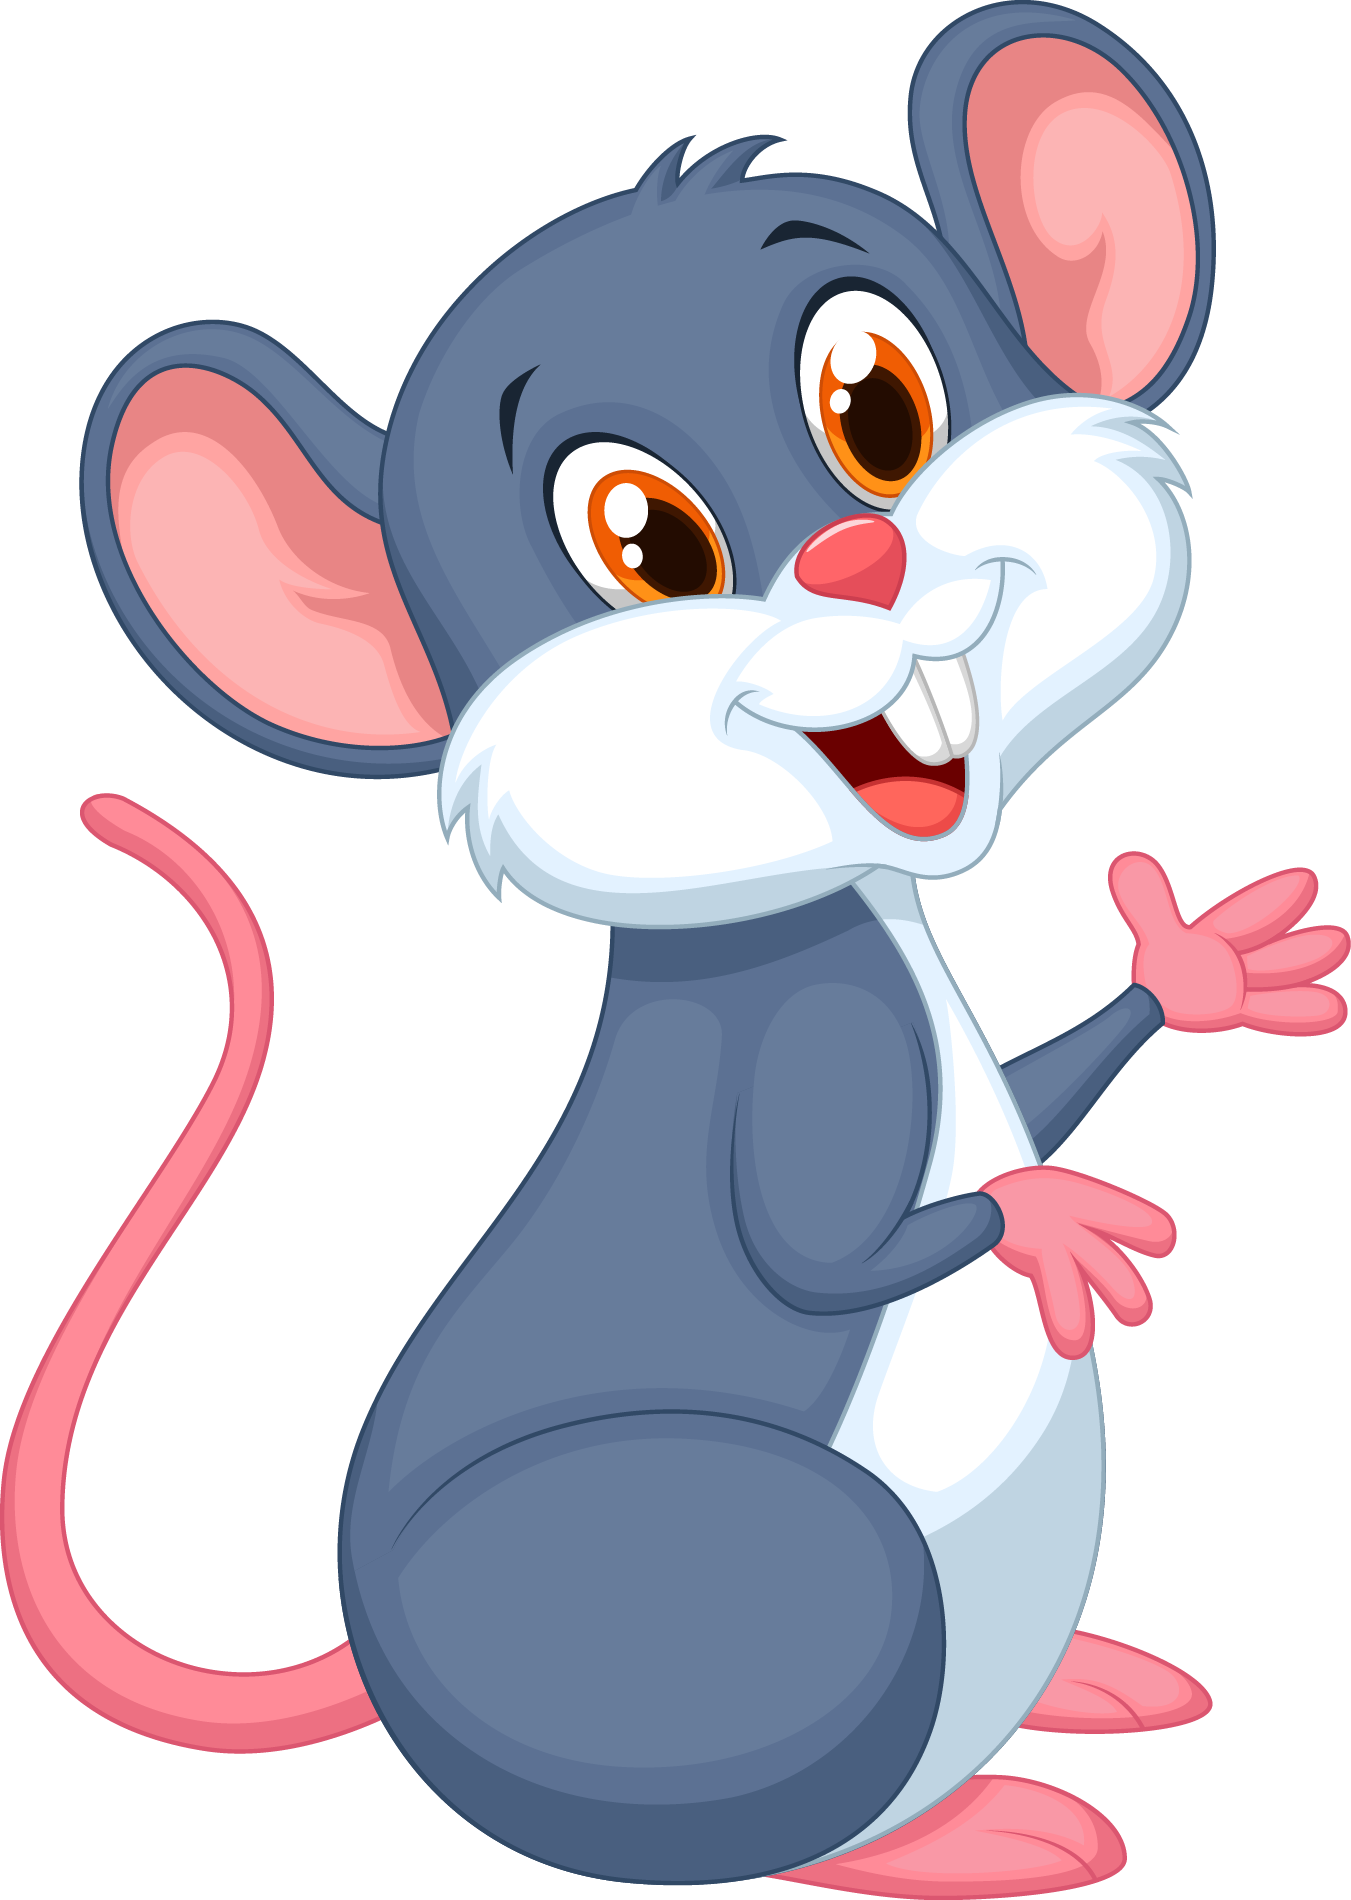 Hamster clipart brown mouse. Keeping small pets petmart